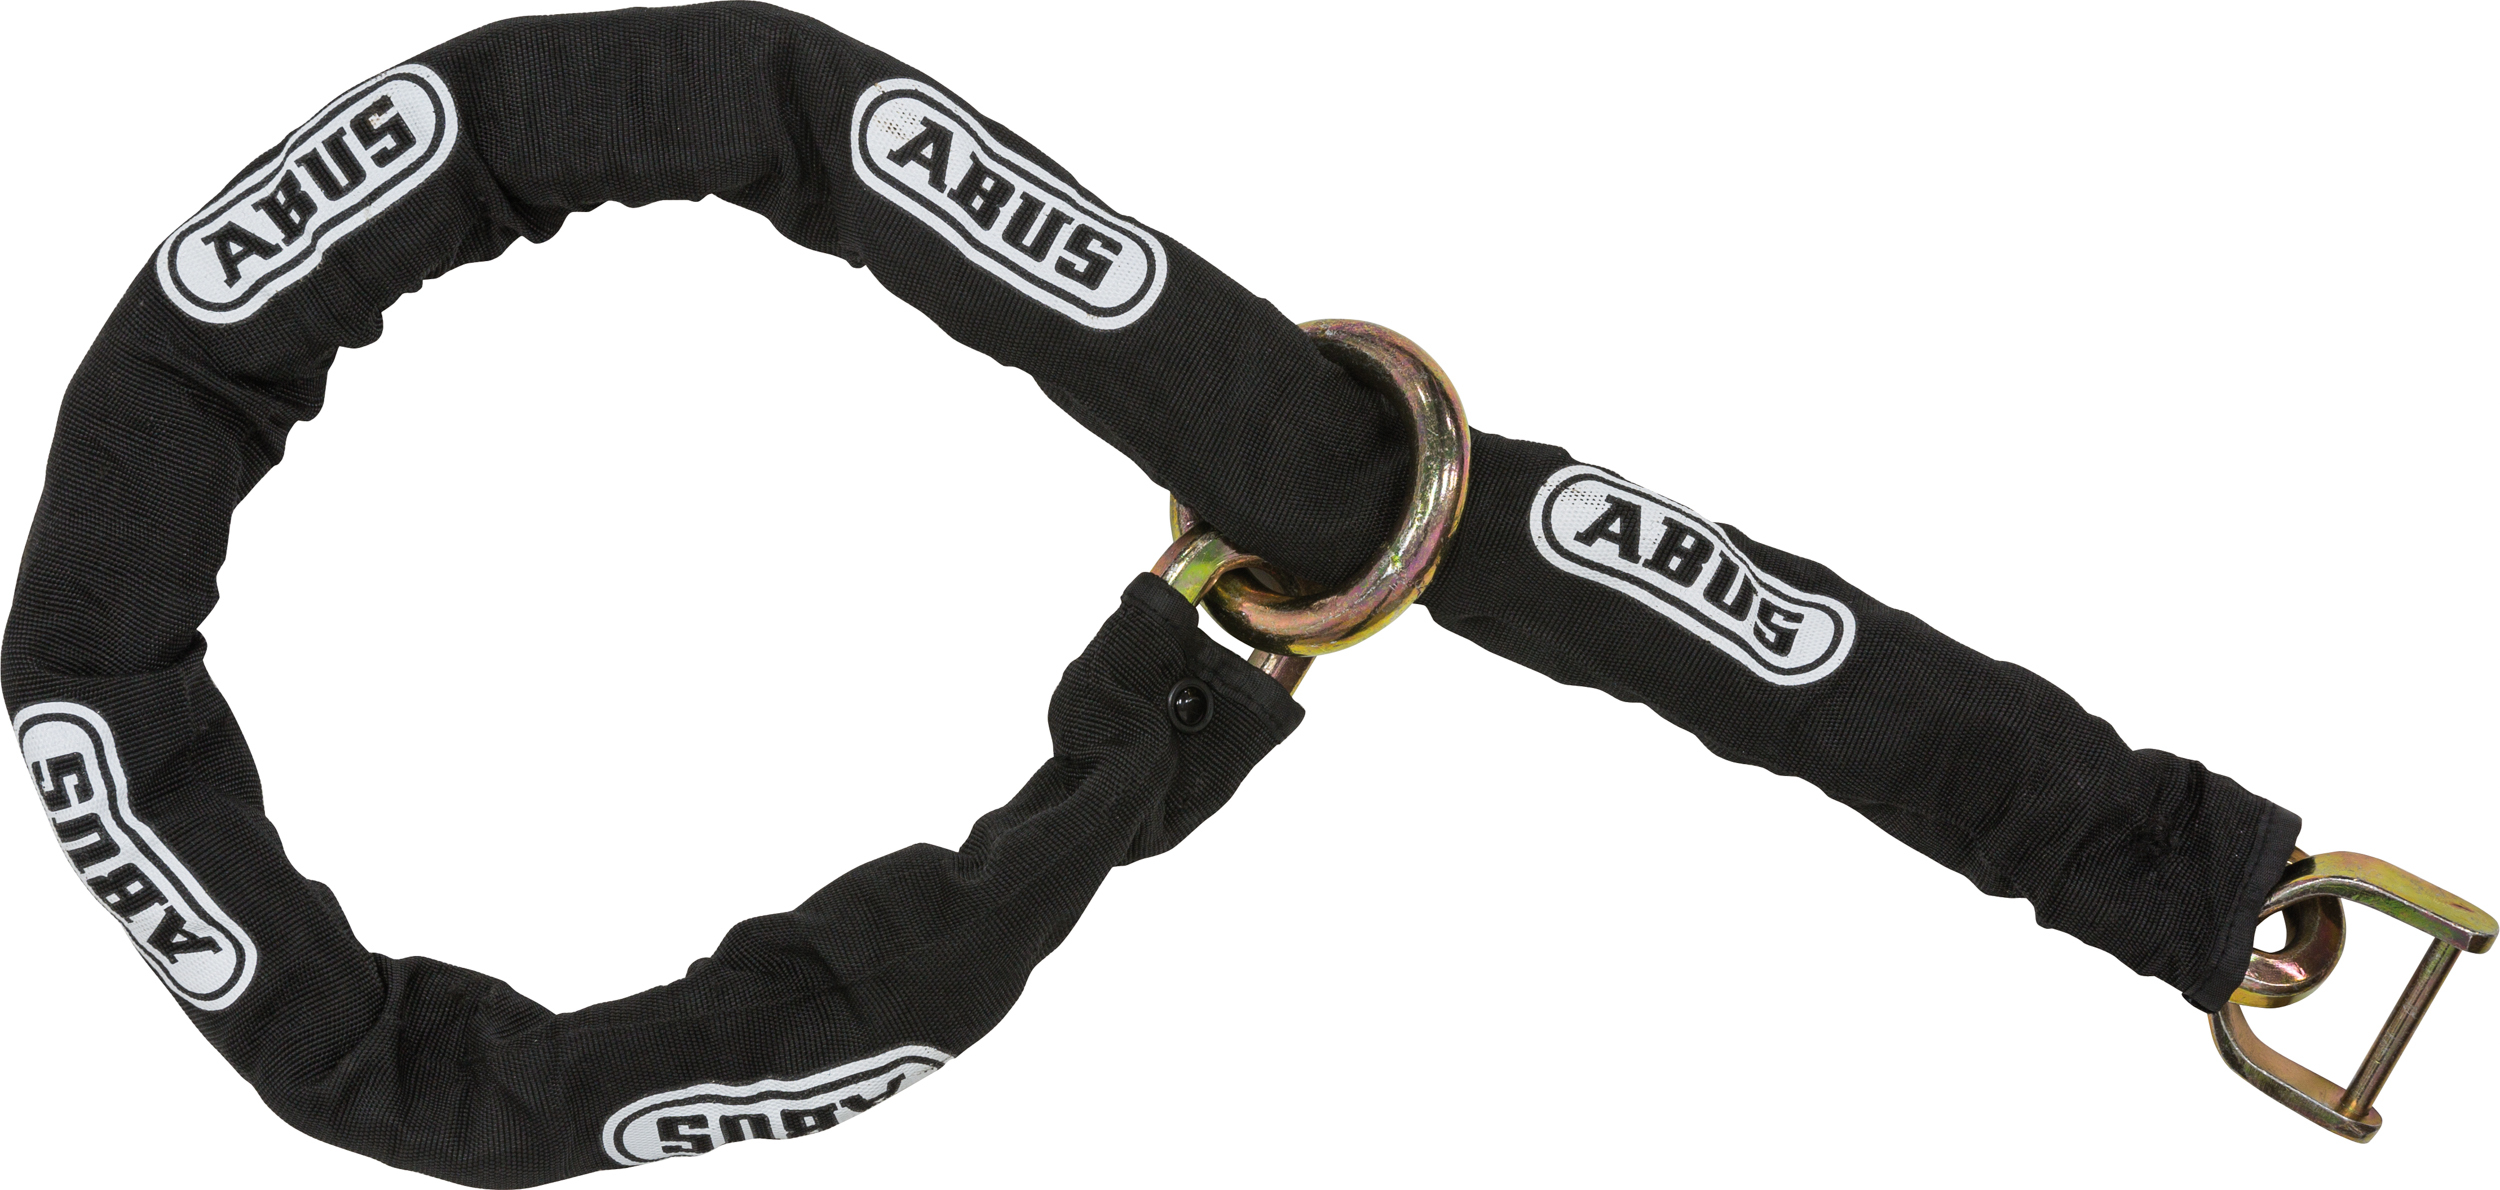 Abus - Adaptor Chain For 8078 Disc Lock